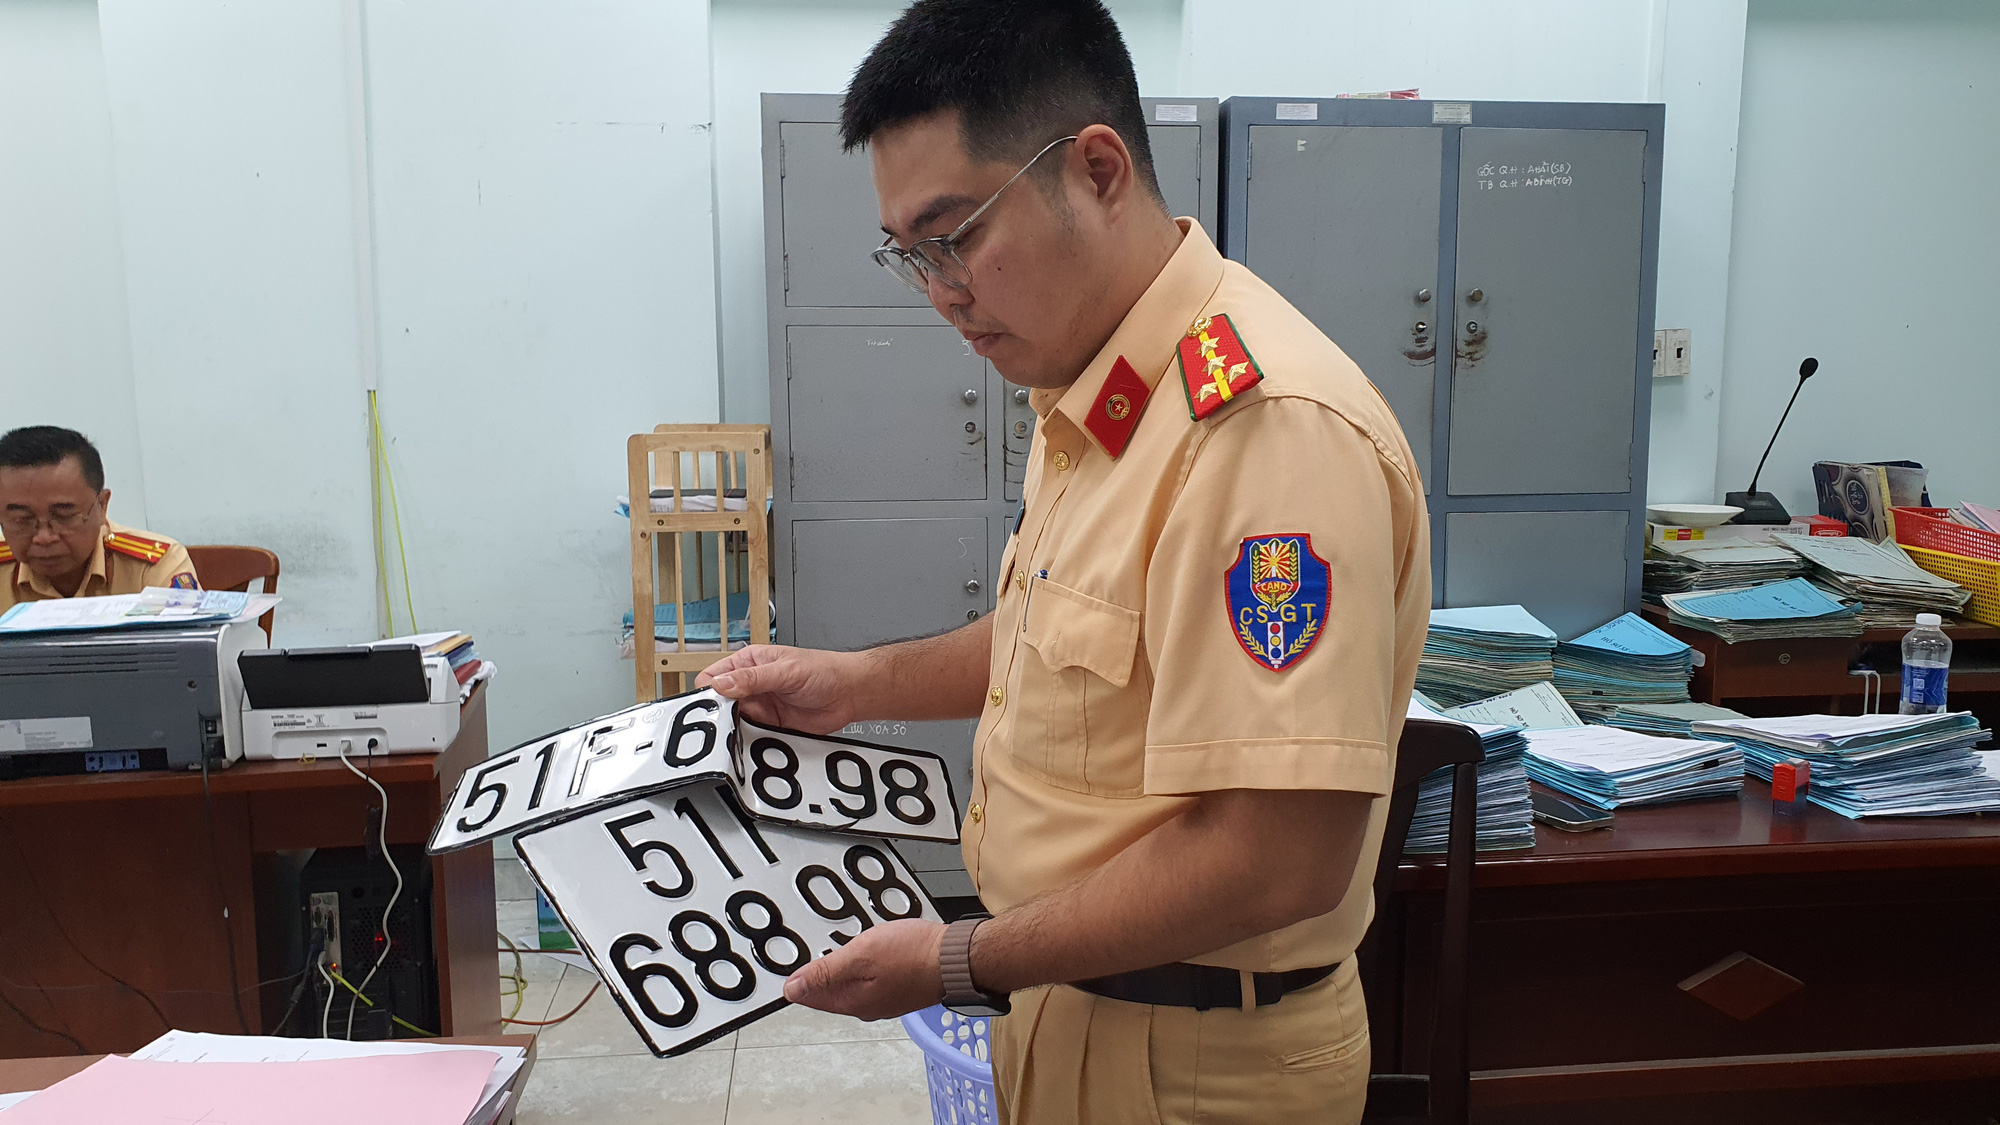 Traffic police force in Ho Chi Minh City cancels license plates after a man sells a car after August 15 - Illustration: Minh Hoa